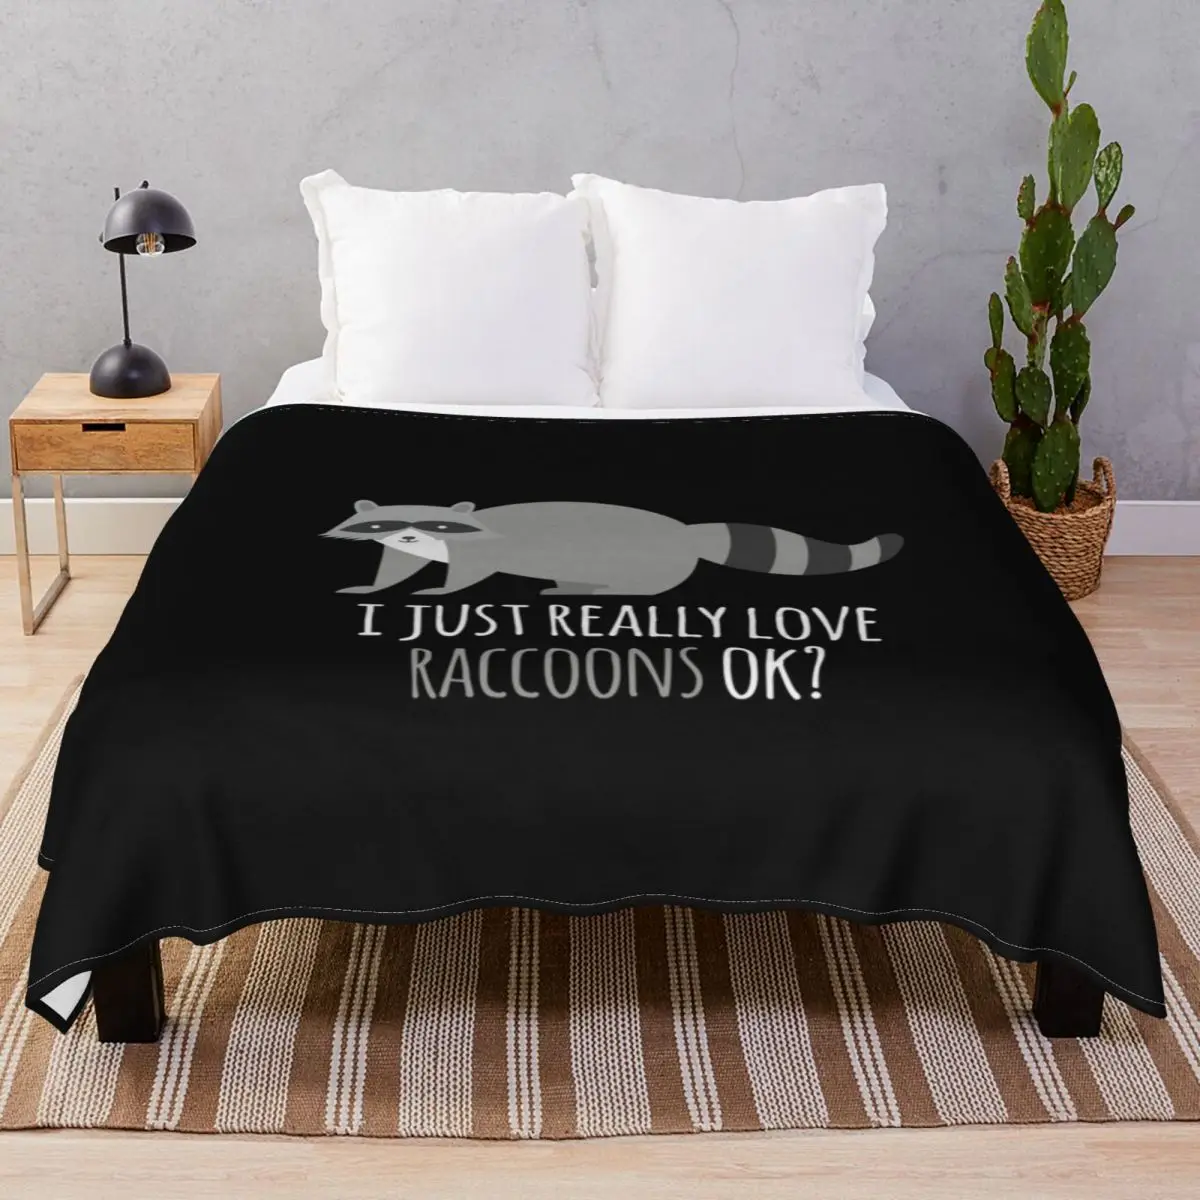 I Just Really Love Raccoons Ok Blankets Fleece Printed Breathable Throw Blanket for Bed Home Couch Camp Office